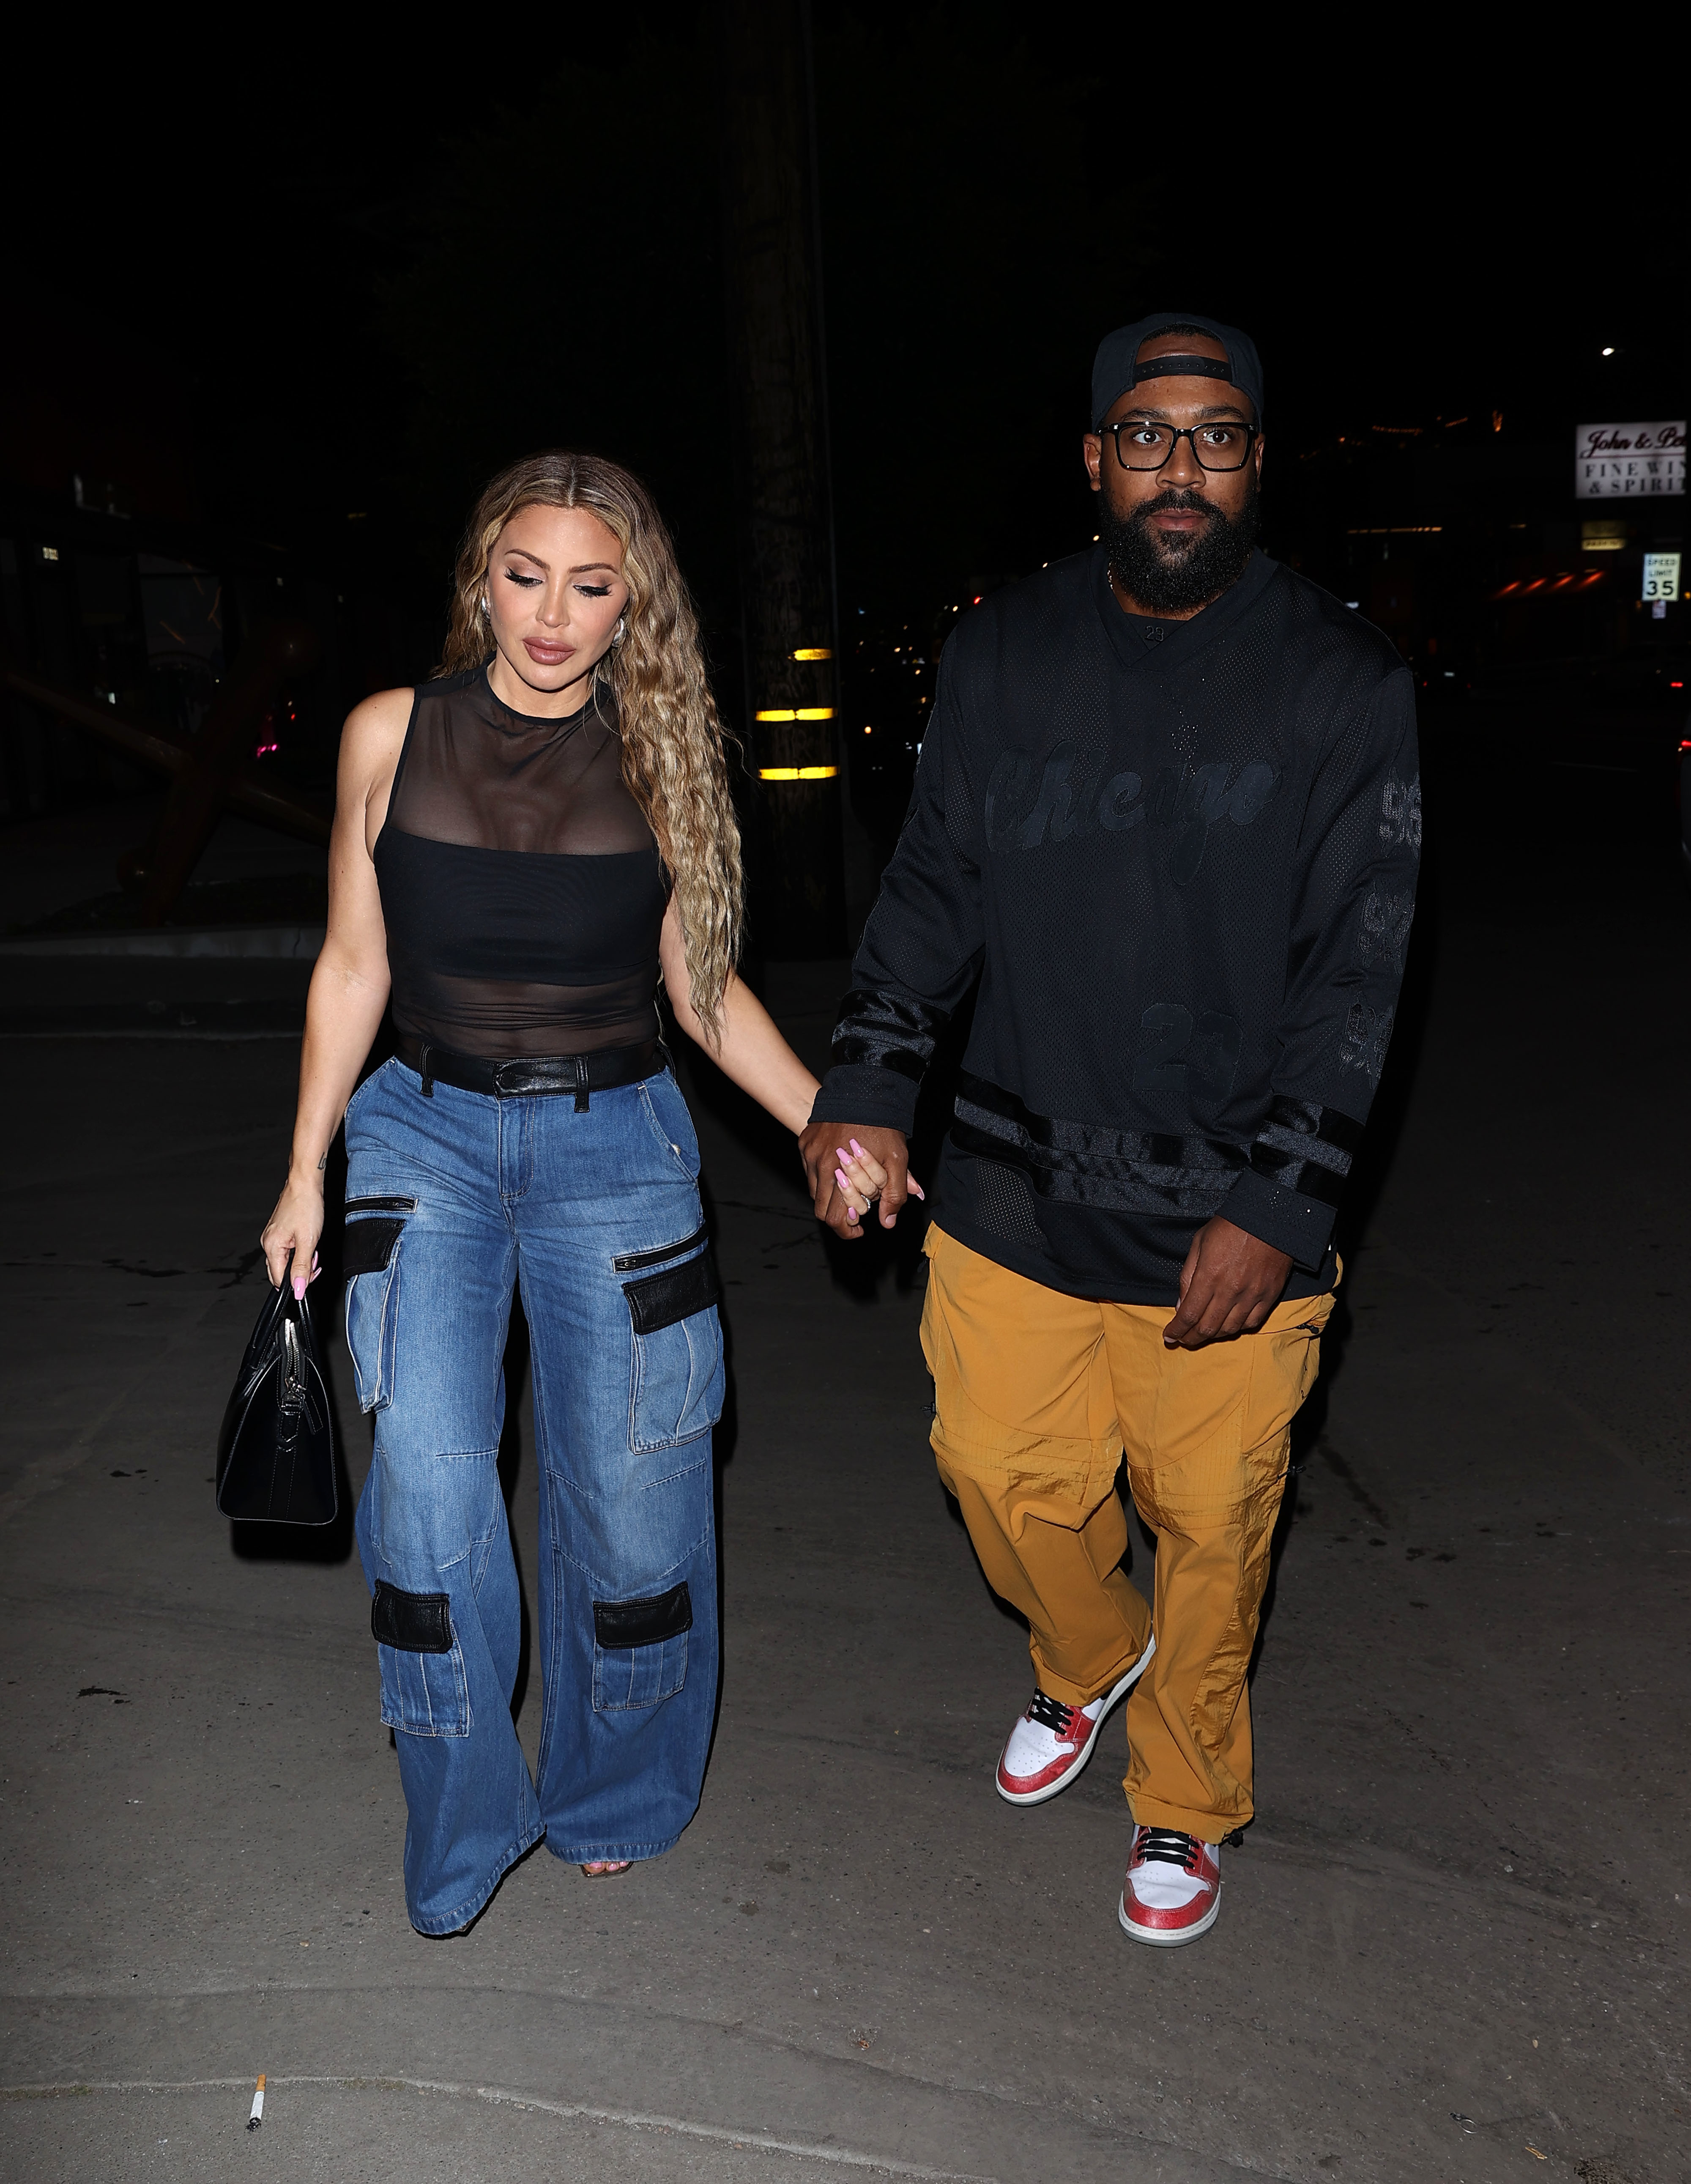 Larsa Pippen and Marcus Jordan walking and holding hands